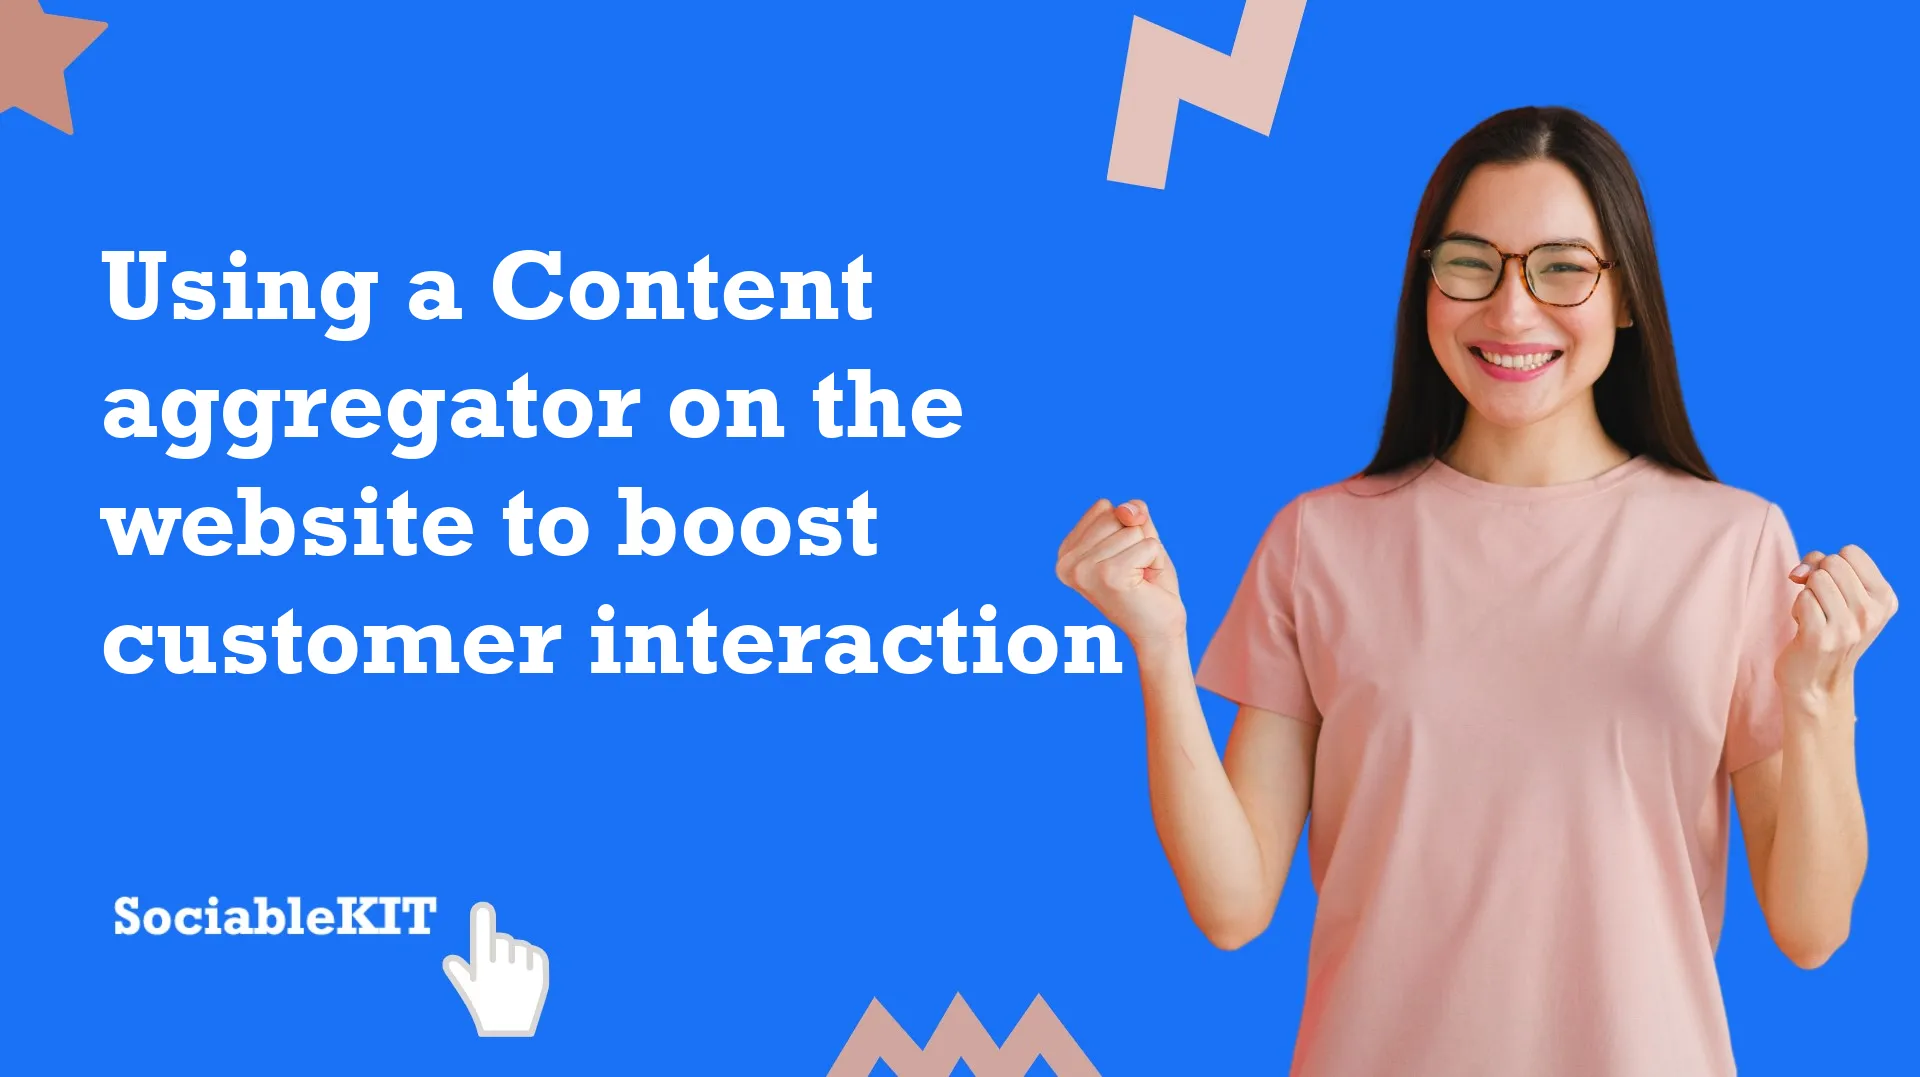 Using a Content Aggregator on the Website to boost customer interaction